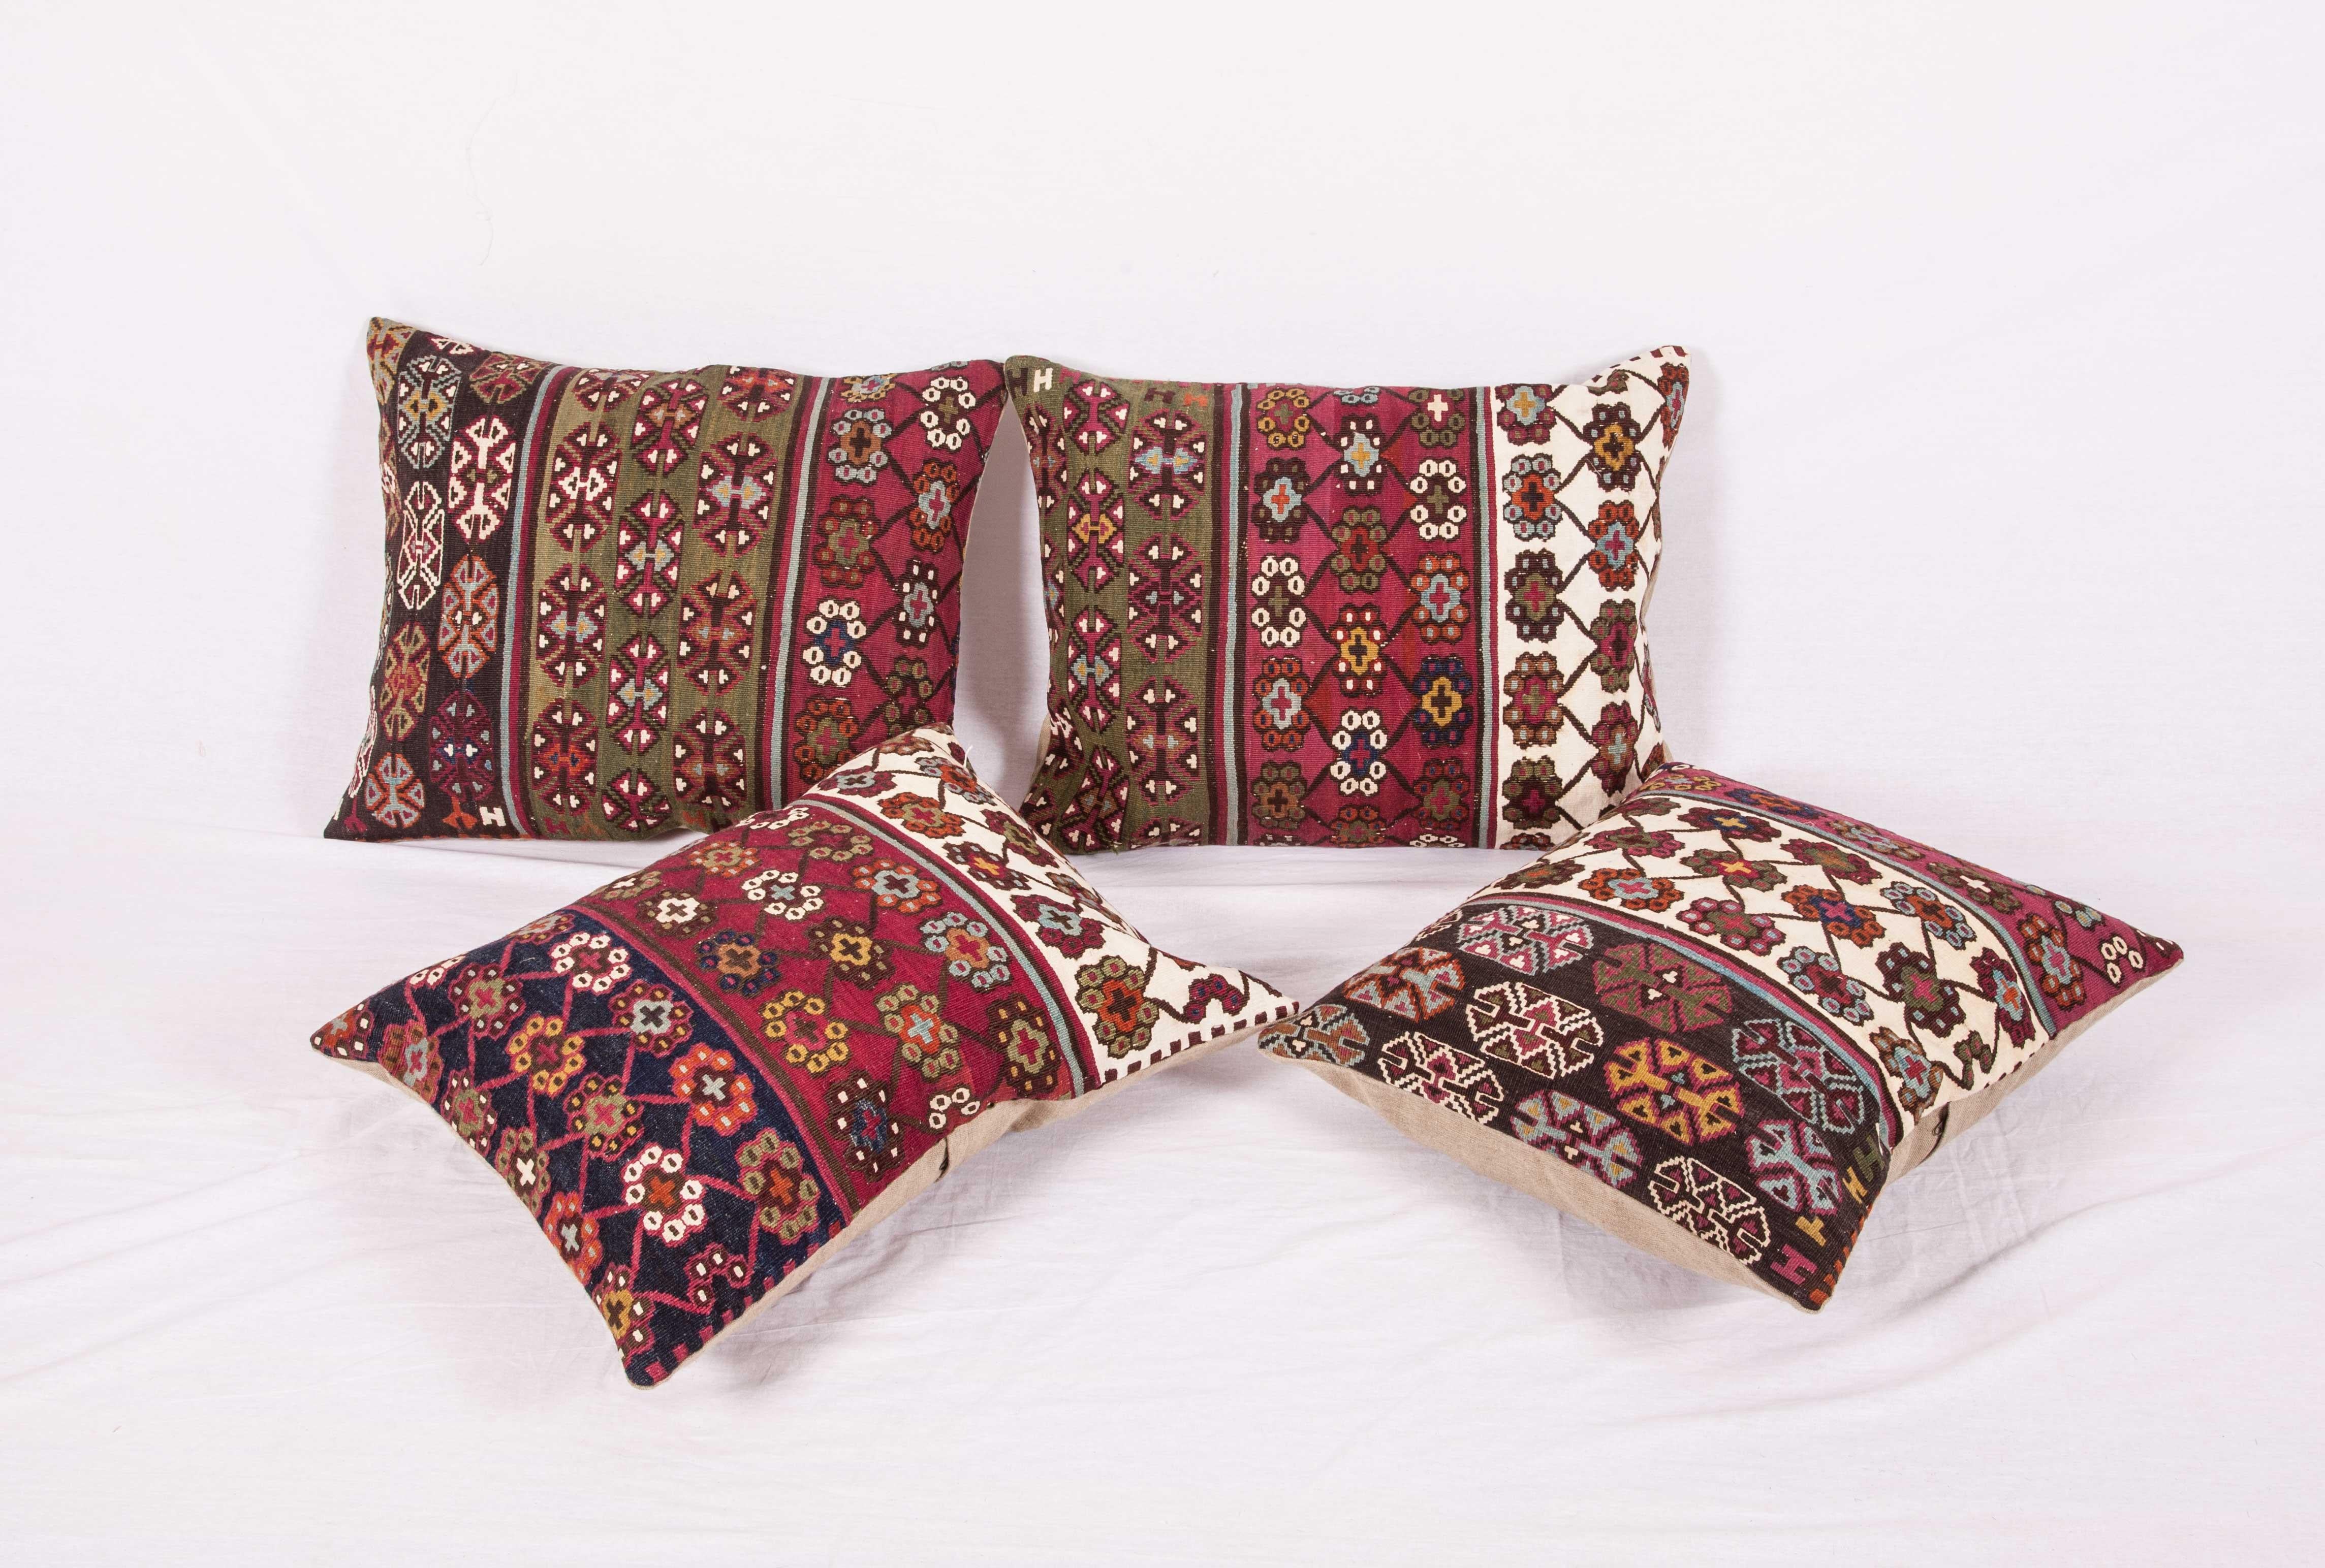 Antique Kilim Cuschion Covers Fashioned from Late 19th Century Turkish Kilim 7